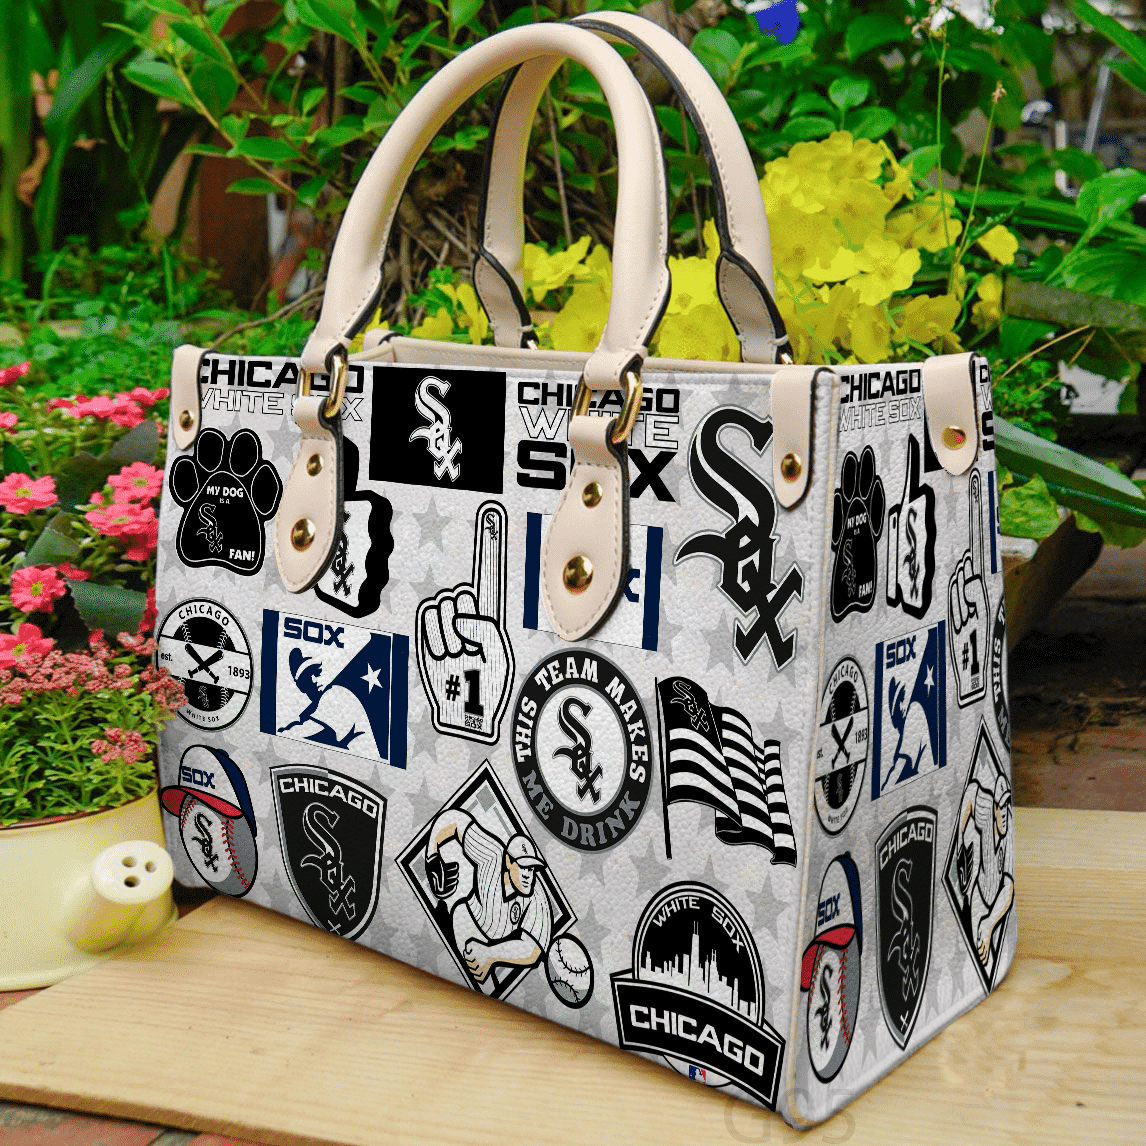 Chicago White Sox 01 Women Leather Hand Bag